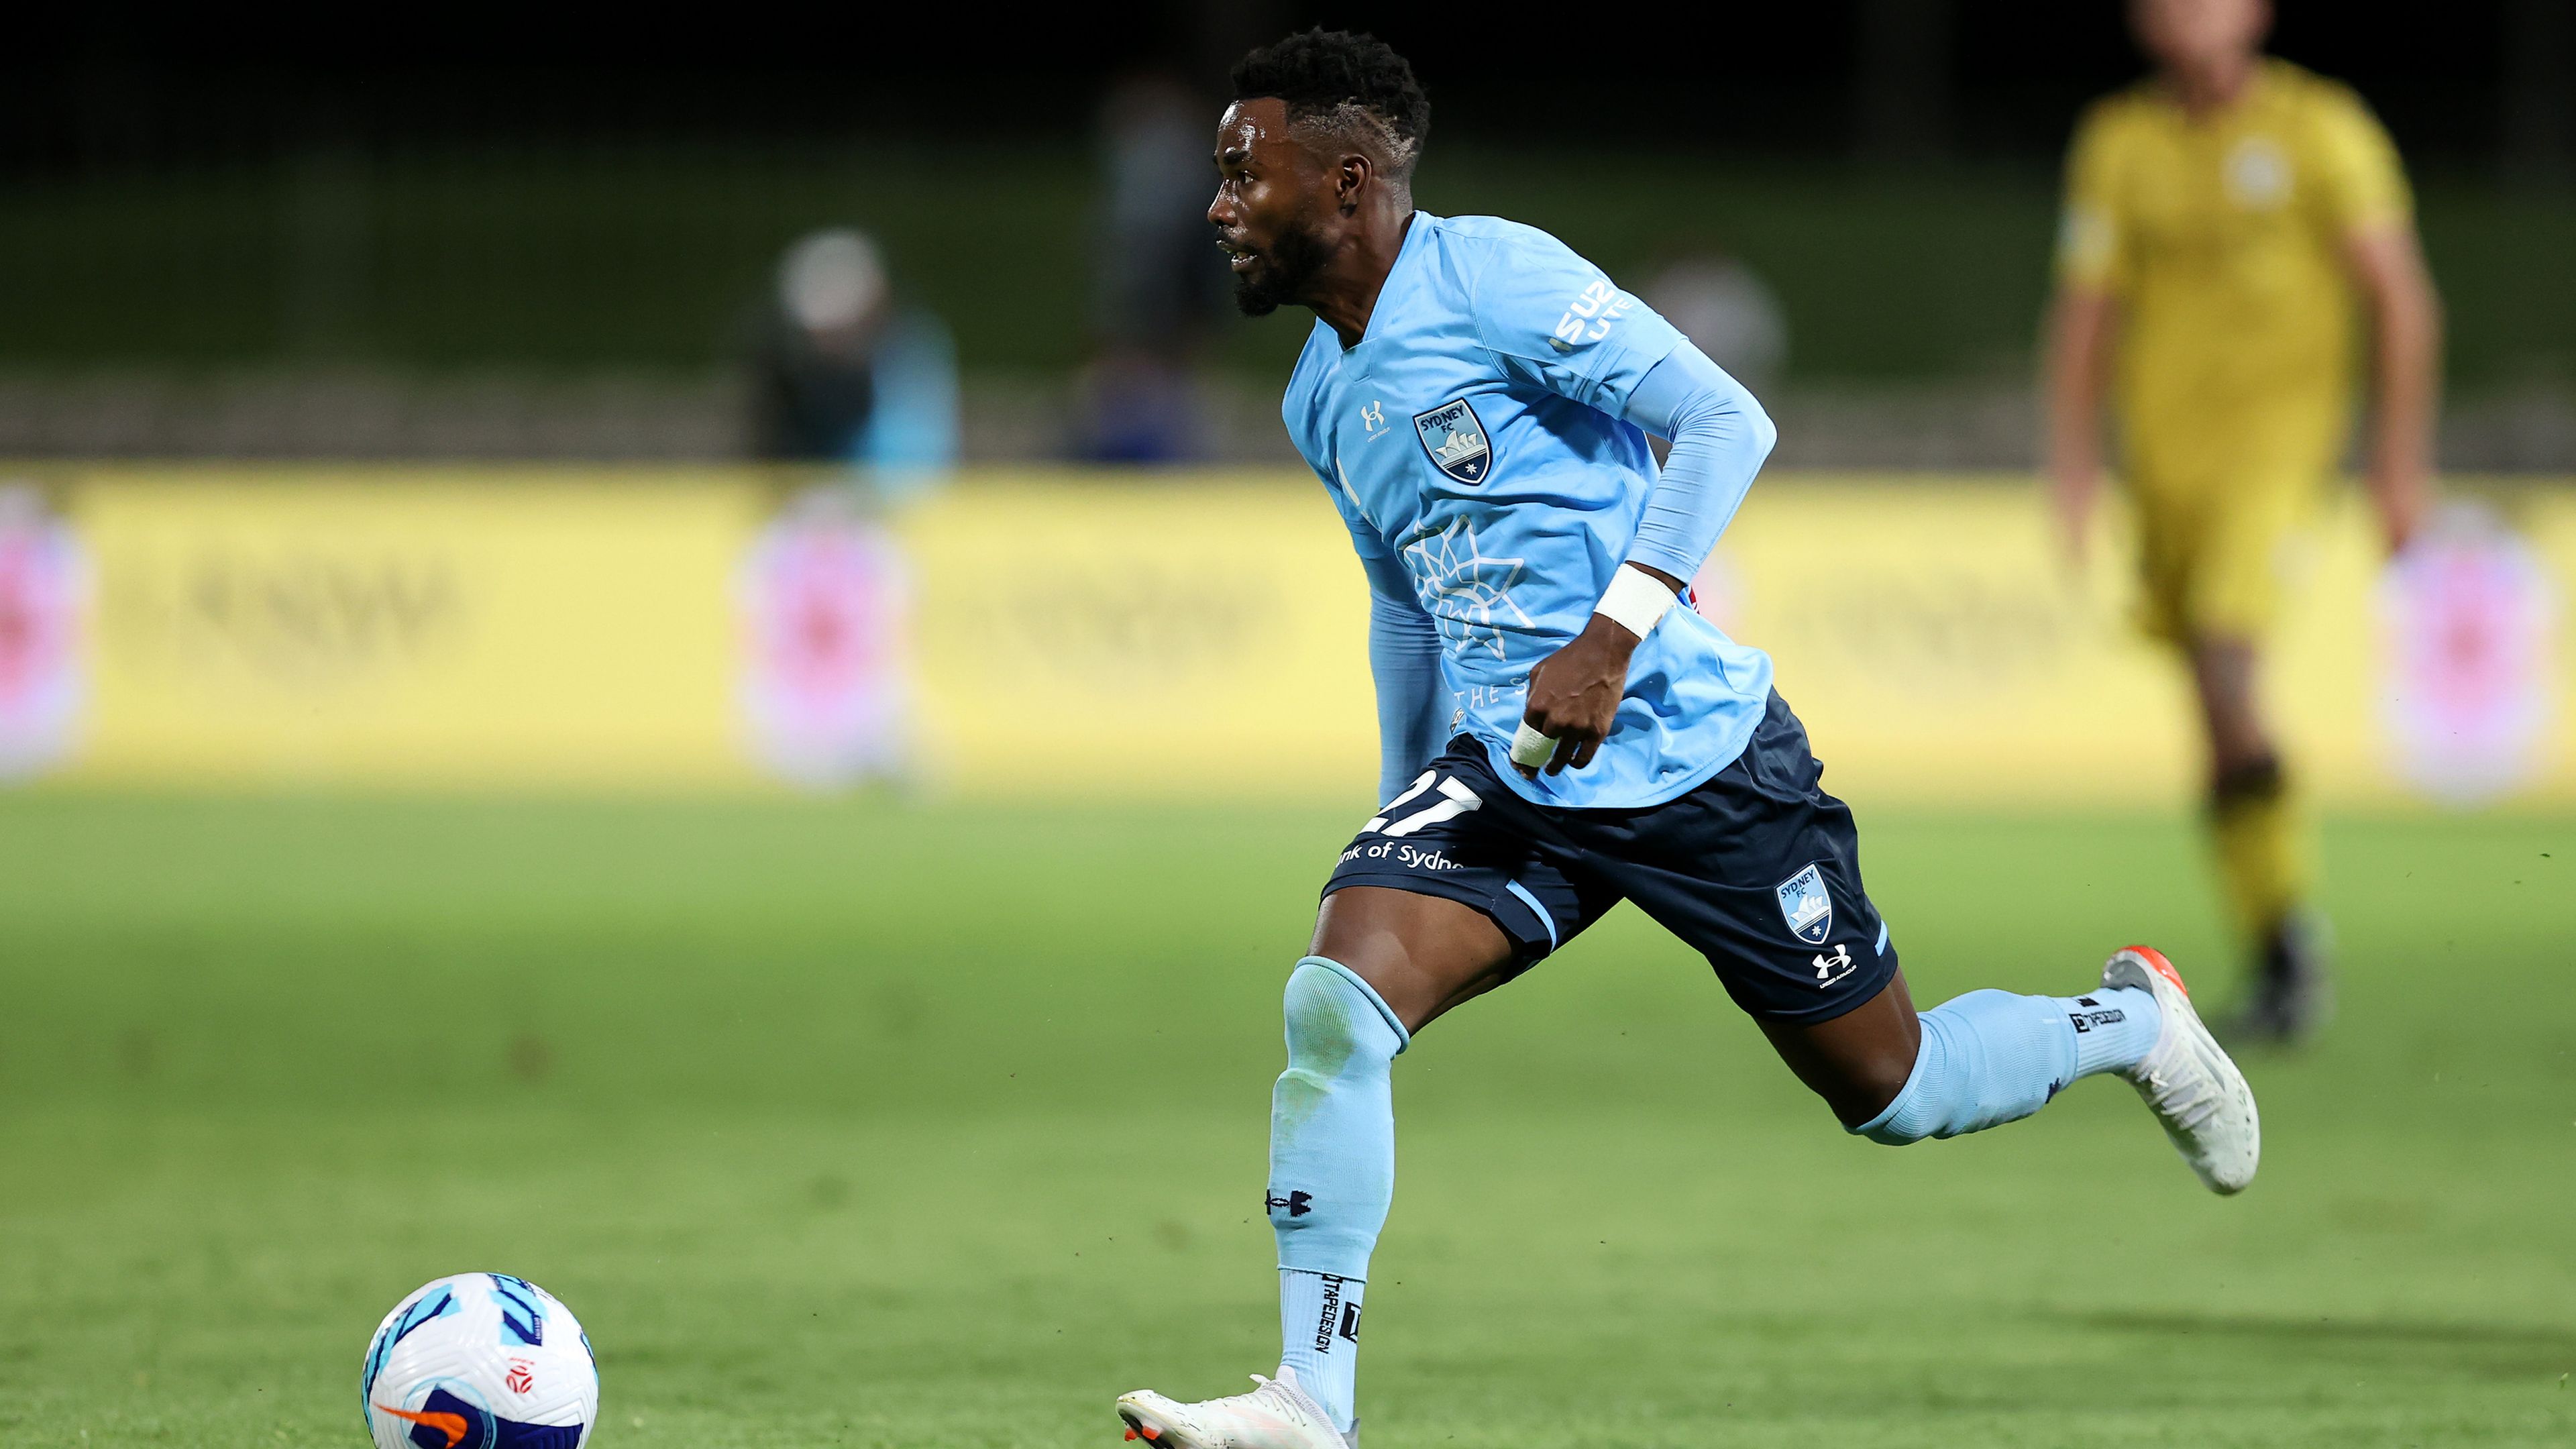 Elvis Kamsoba celebrates first goal for Sydney FC with trademark move